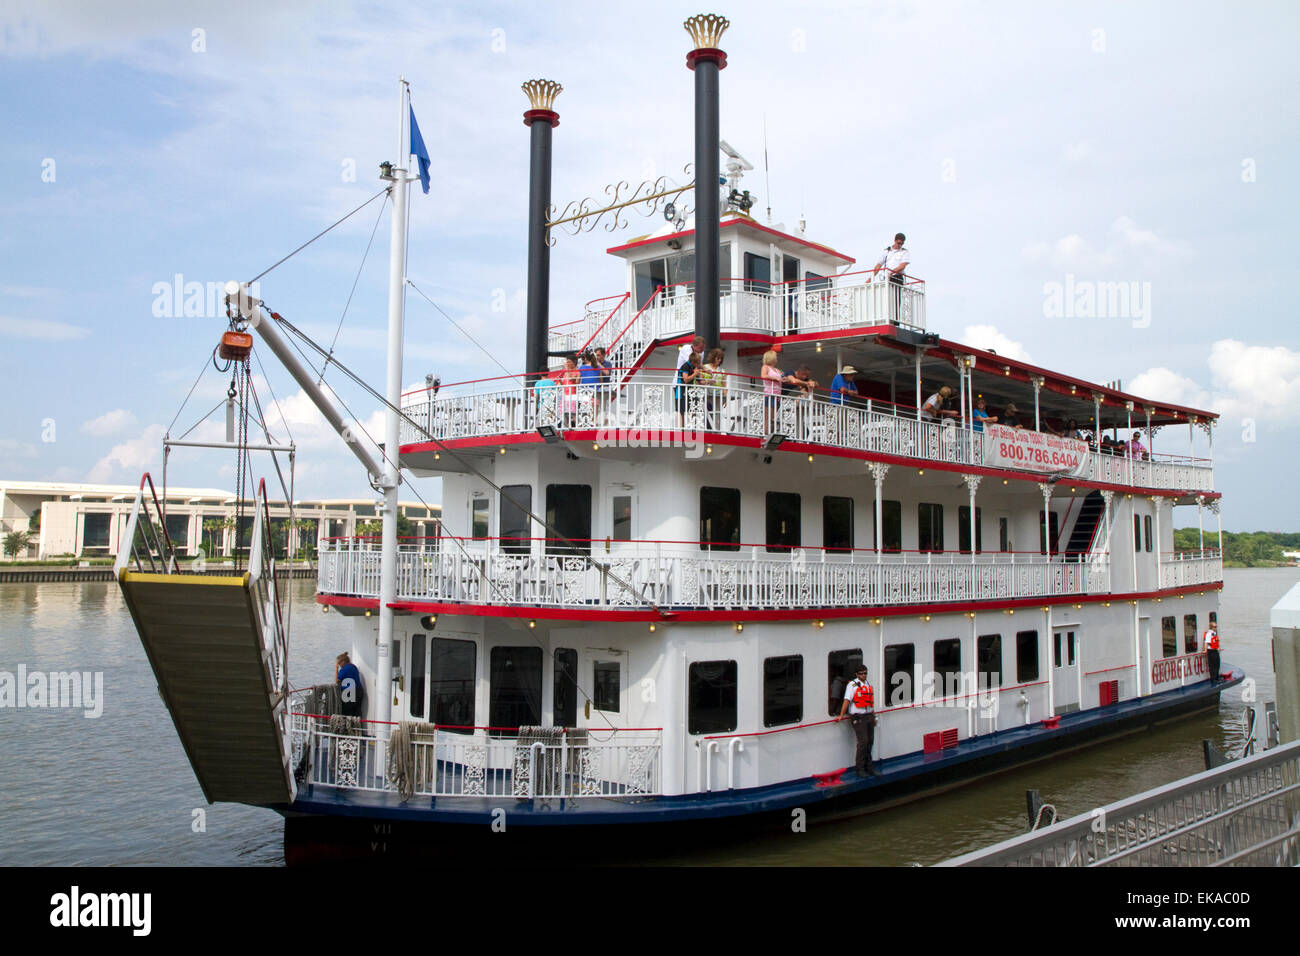 The Georgia Queen paddle steamer riverboat in Savannah, Georgia, USA. Stock Photo